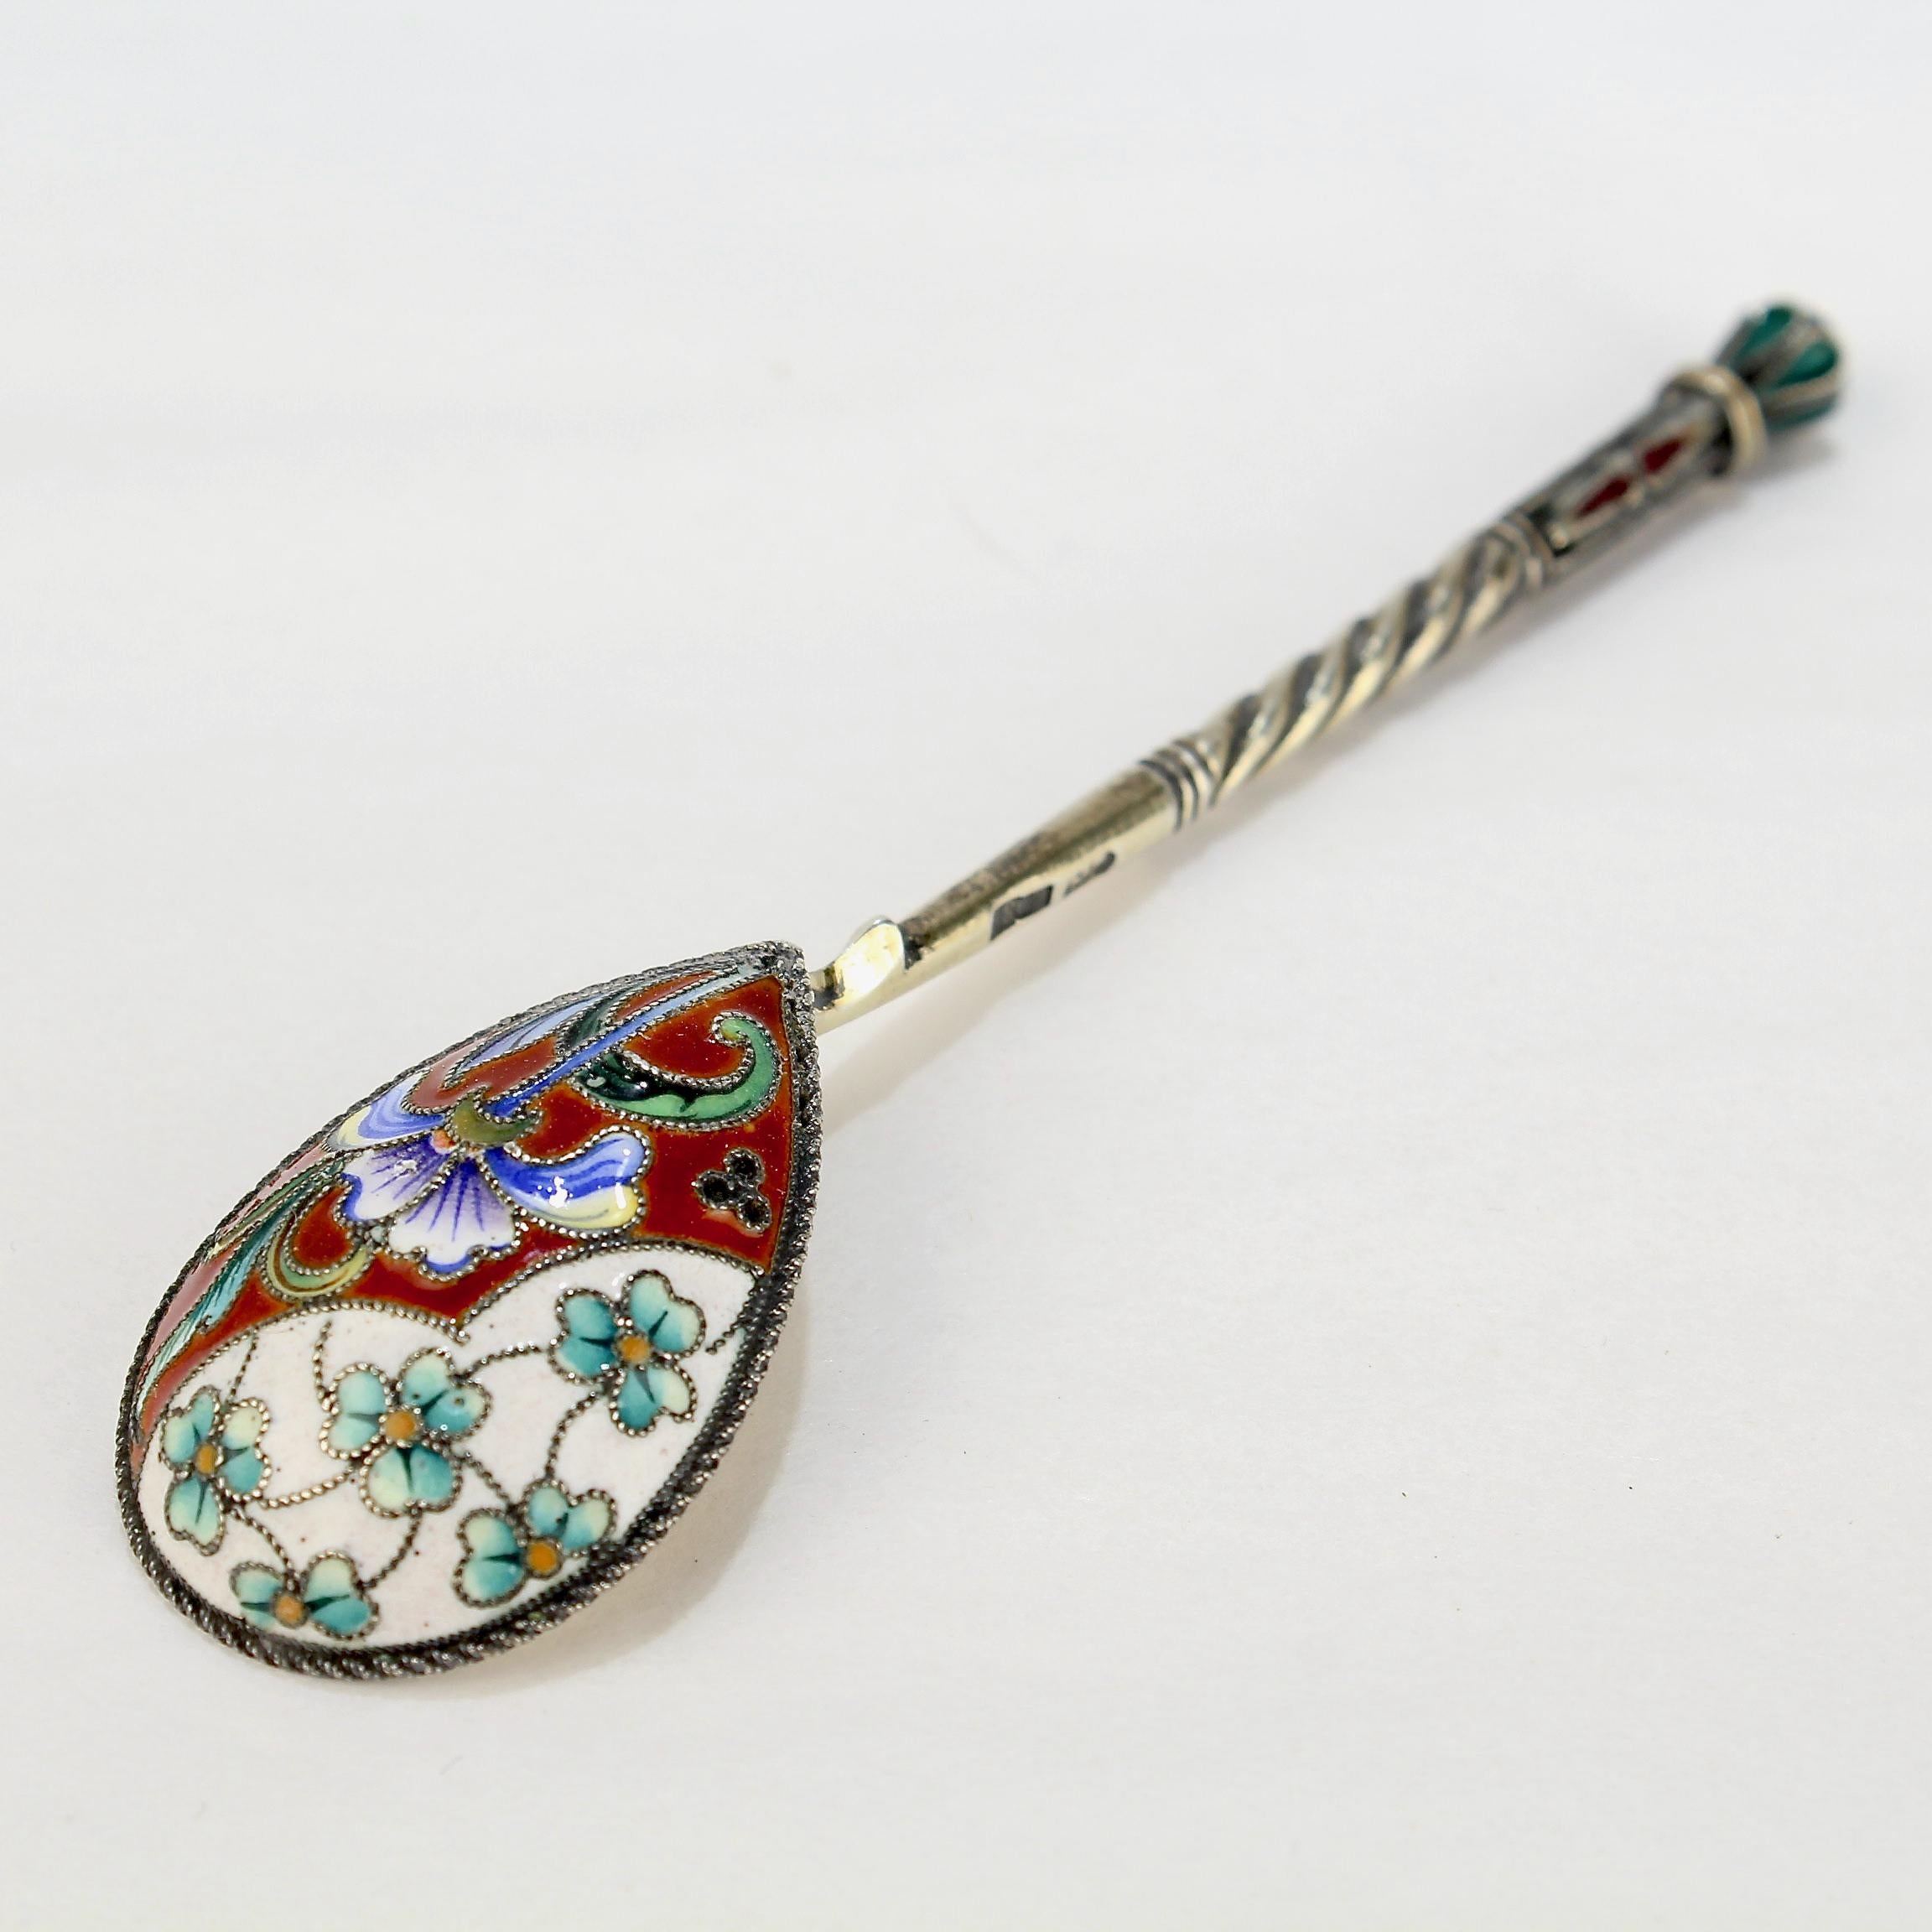 A very fine antique Russian tea or kvosh spoon..

By Maria Sokolova.

With polychrome shaded cloisonné enamel decoration to both the front and reverse.

Simply a wonderful piece of Imperial Russian silver!

Date:
Late 19th or Early 20th